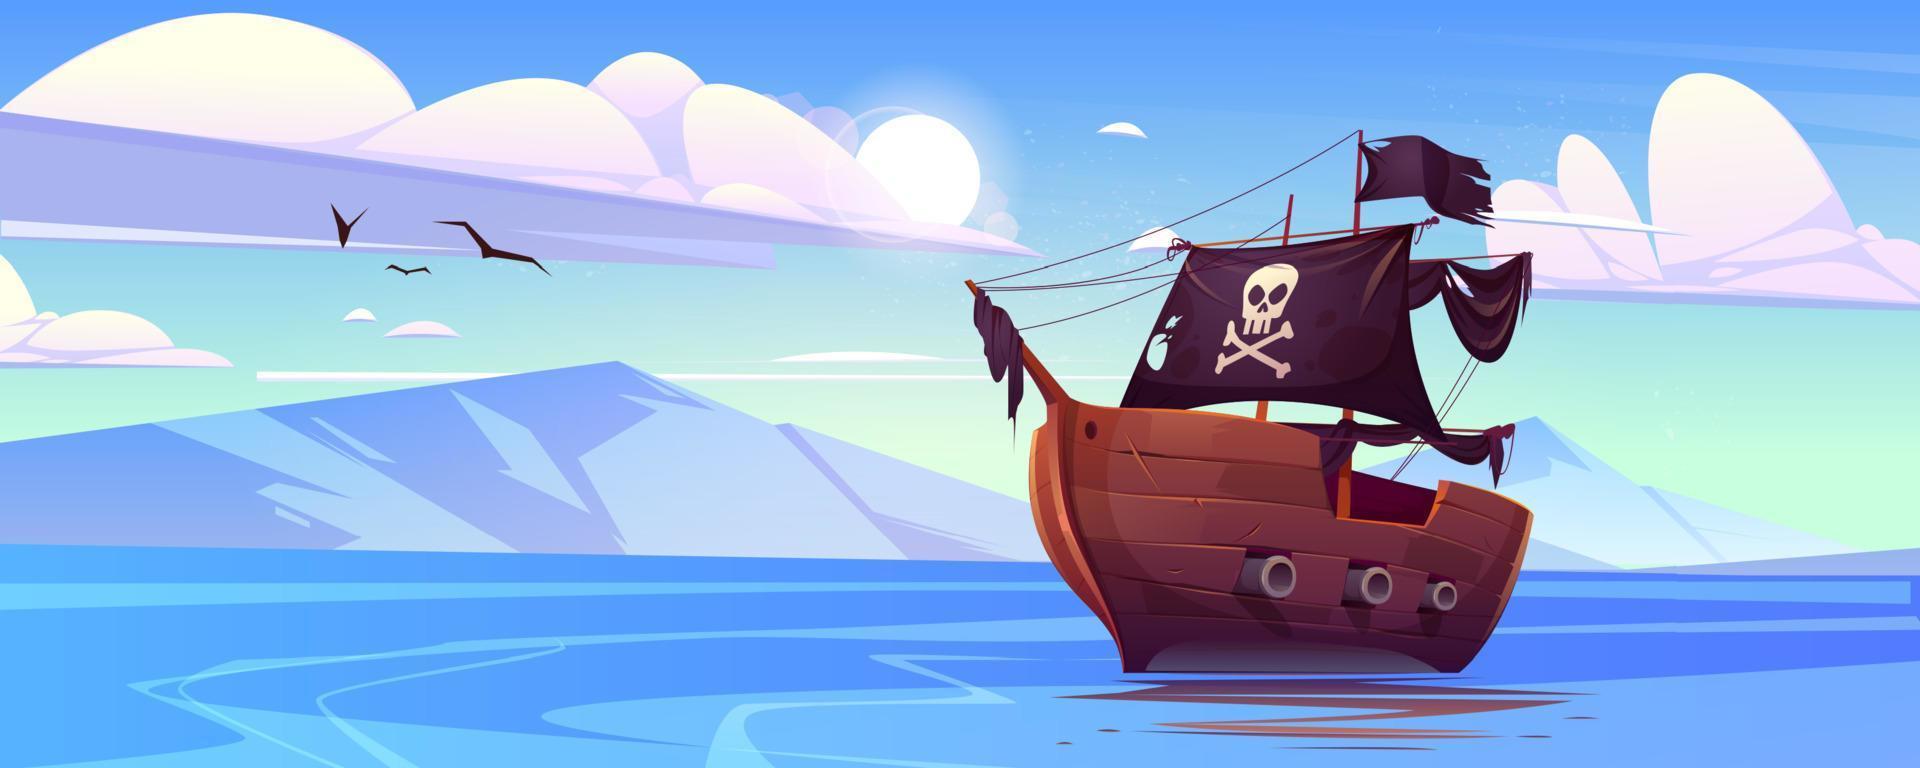 Pirate ship with black sails and flag with skull vector